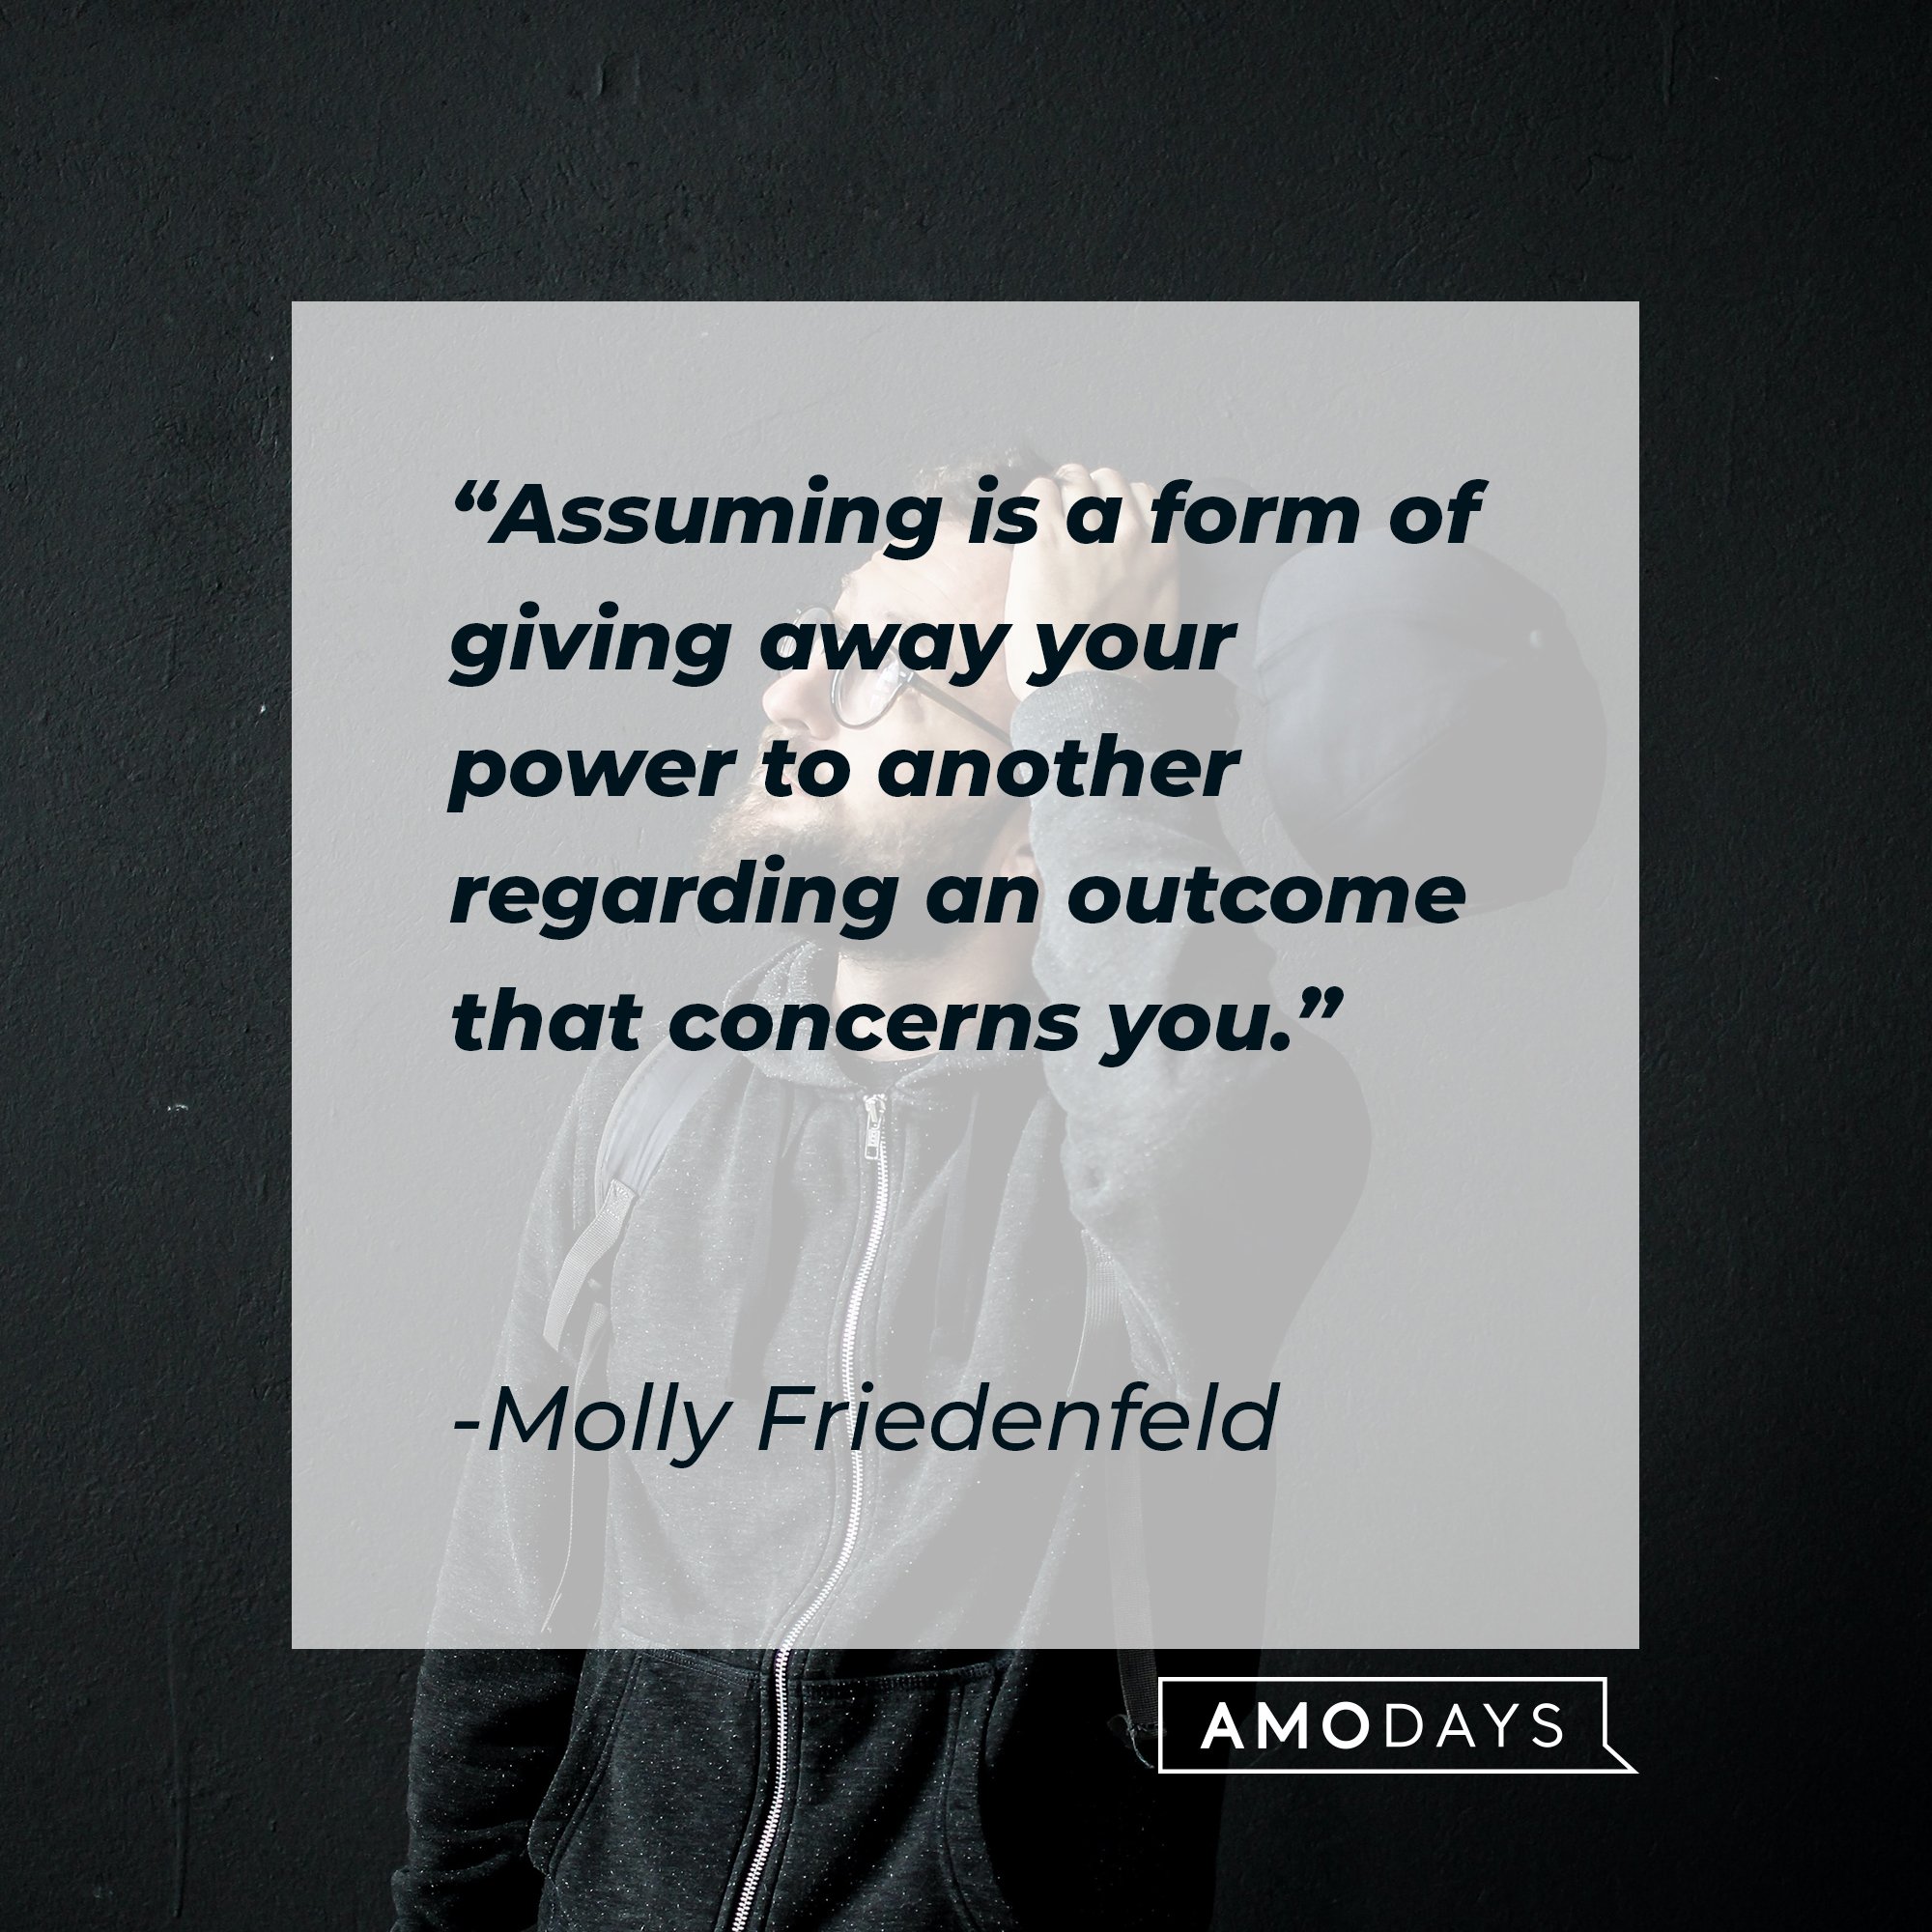 Molly Friedenfeld’s quote: “Assuming is a form of giving away your power to another regarding an outcome that concerns you.” | Image: AmoDays 